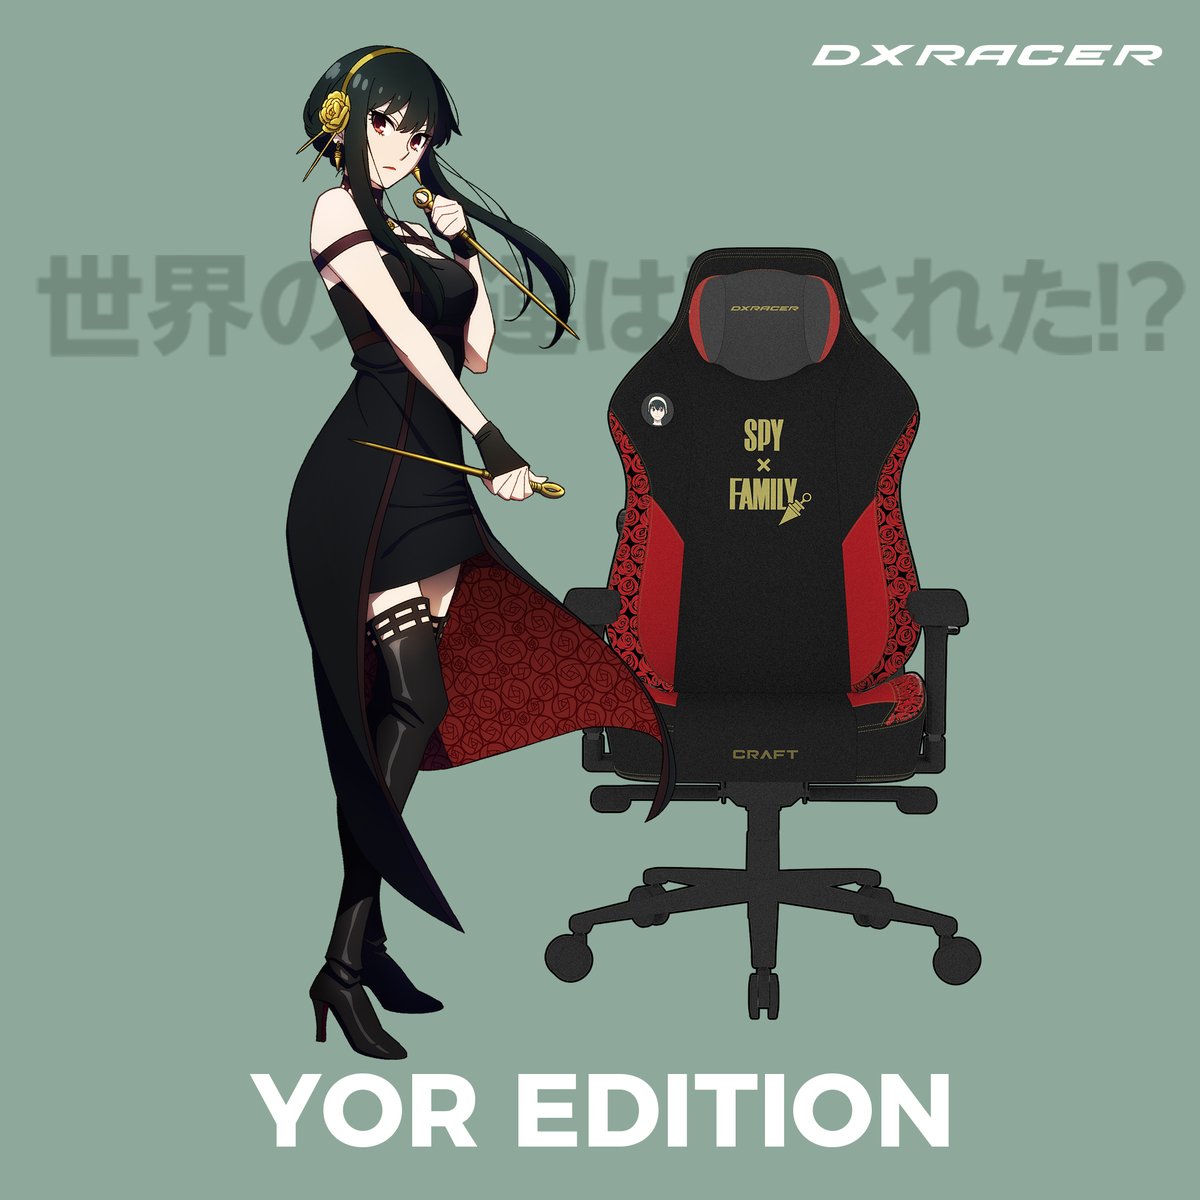 🌐 Proud Partner Spotlight 🪑 Introducing the DXRacer Spy Family Edition Chair! Elevate your gaming experience with this exclusive collaboration. Join the DXRacer family and game in style! 🎮🕵️‍♂️ #DXRacer #SpyFamilyEdition #GamingChair